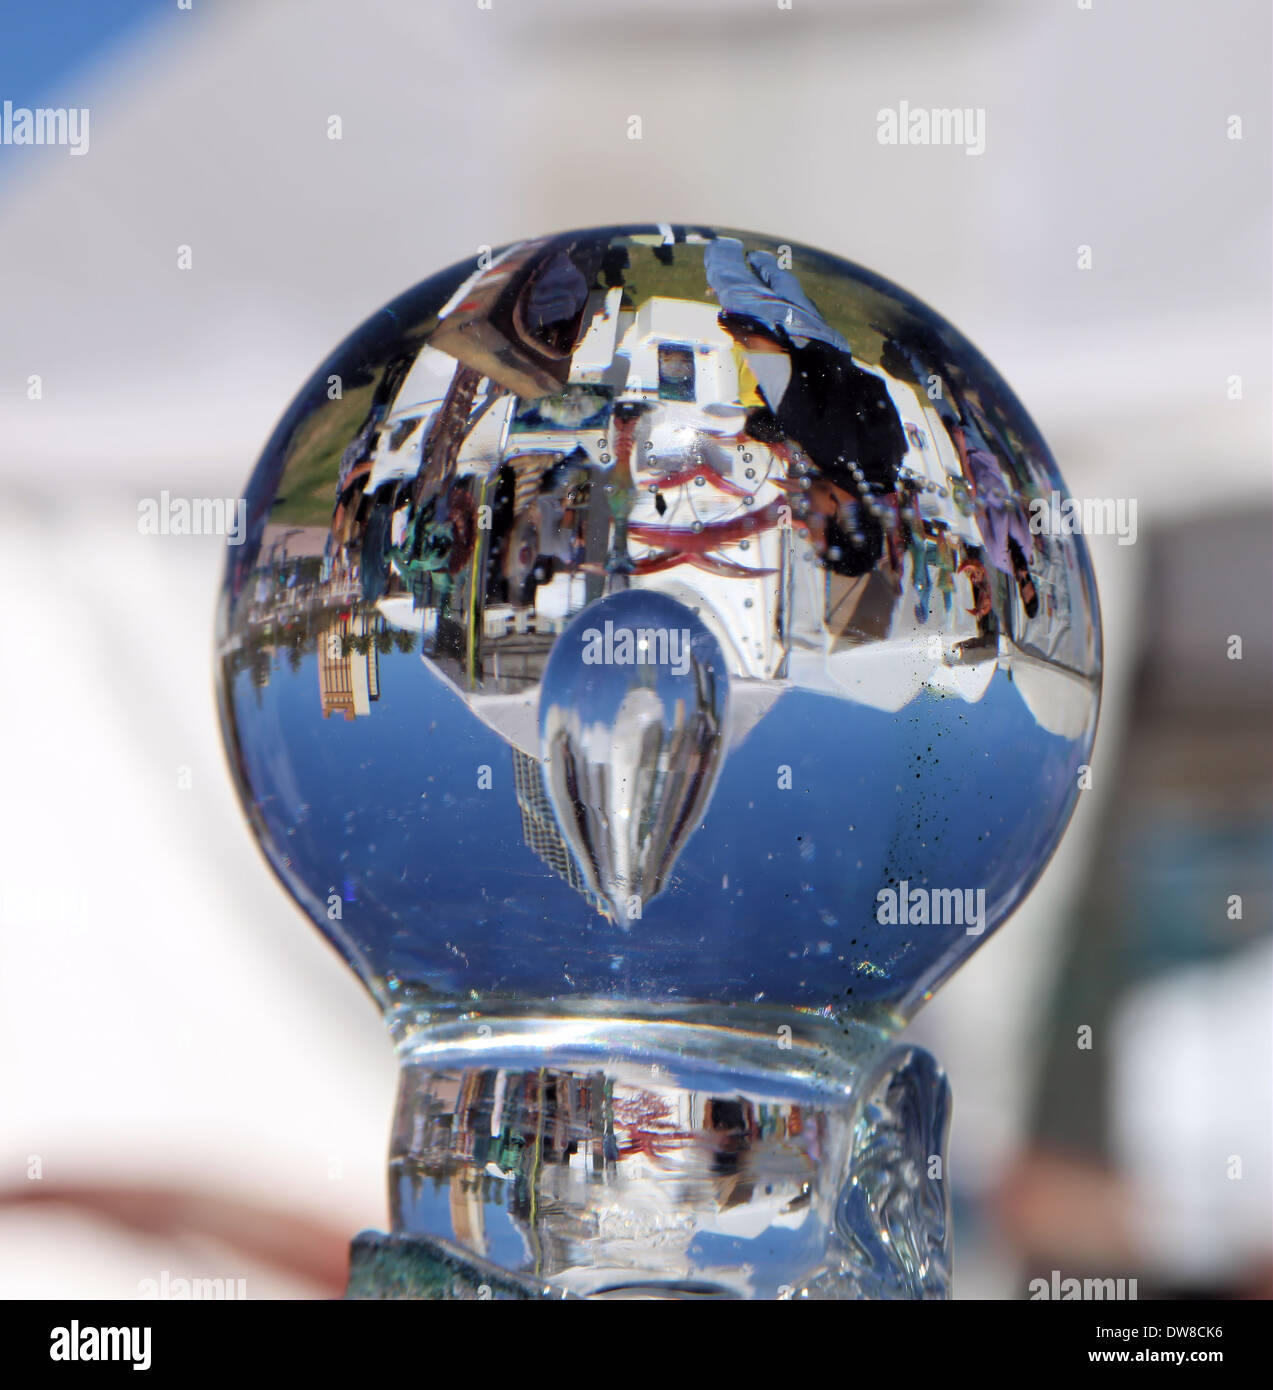 GLASS GLOBE WITH REFLECTIONS Stock Photo